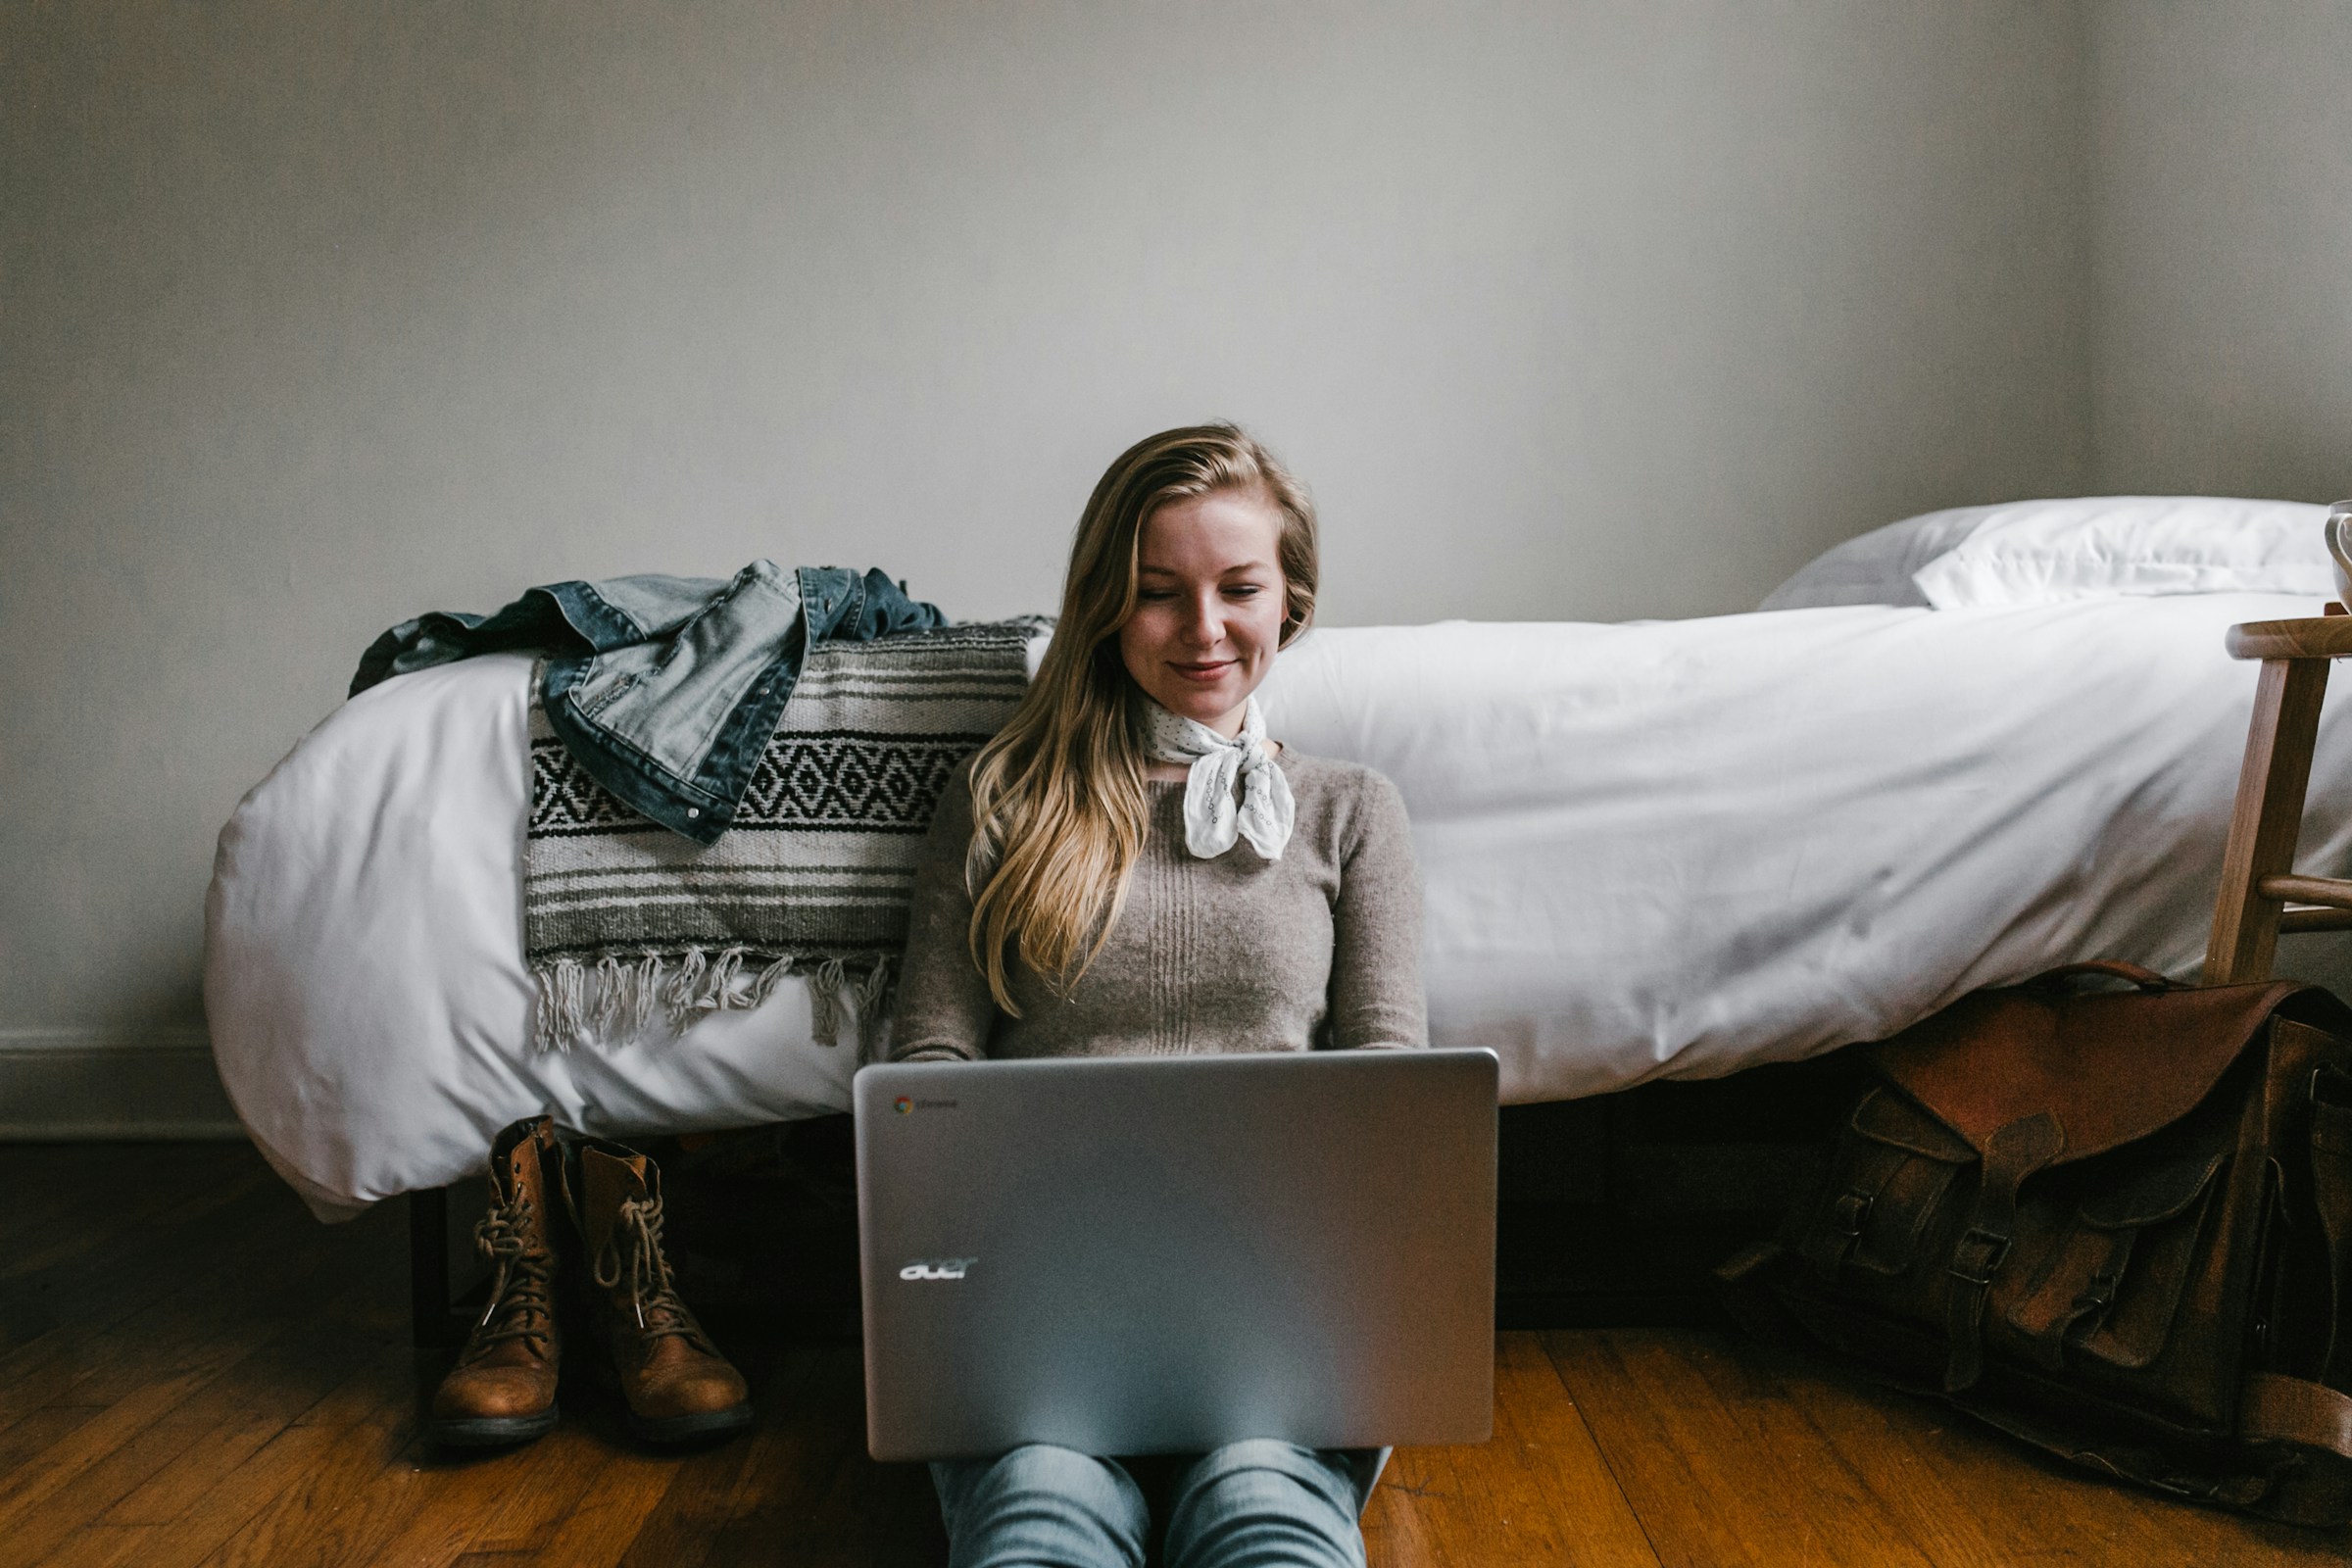 A woman sitting beside her bed while using a laptop | Source: Unsplash